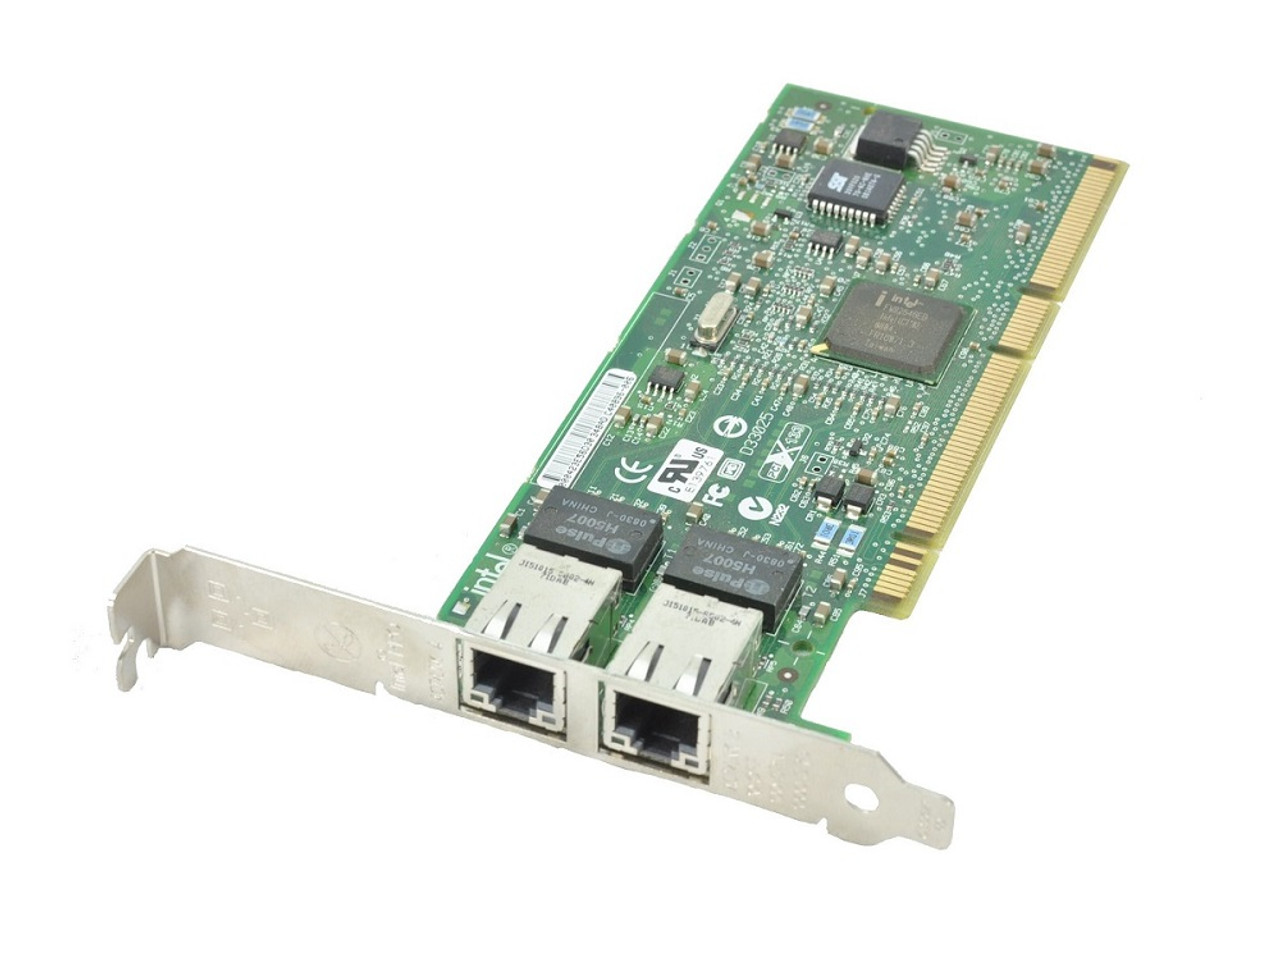 A1119124 - Dell Pro/1000 PT Quad Port Low Profile Server Adapter PCI-Express with Standard Bracket